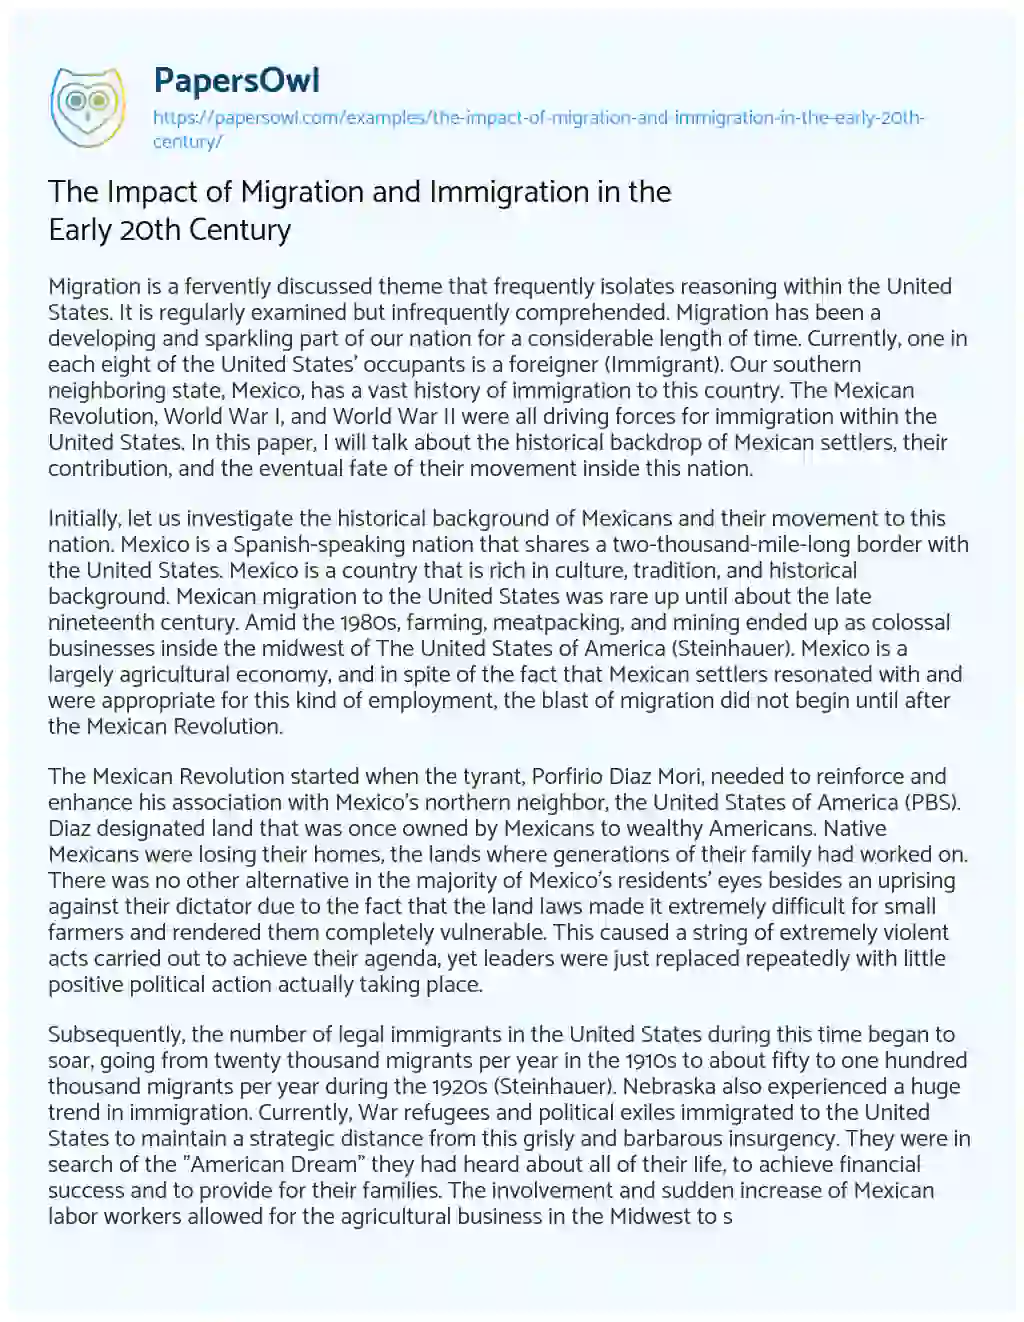 Essay on The Impact of Migration and Immigration in the Early 20th Century